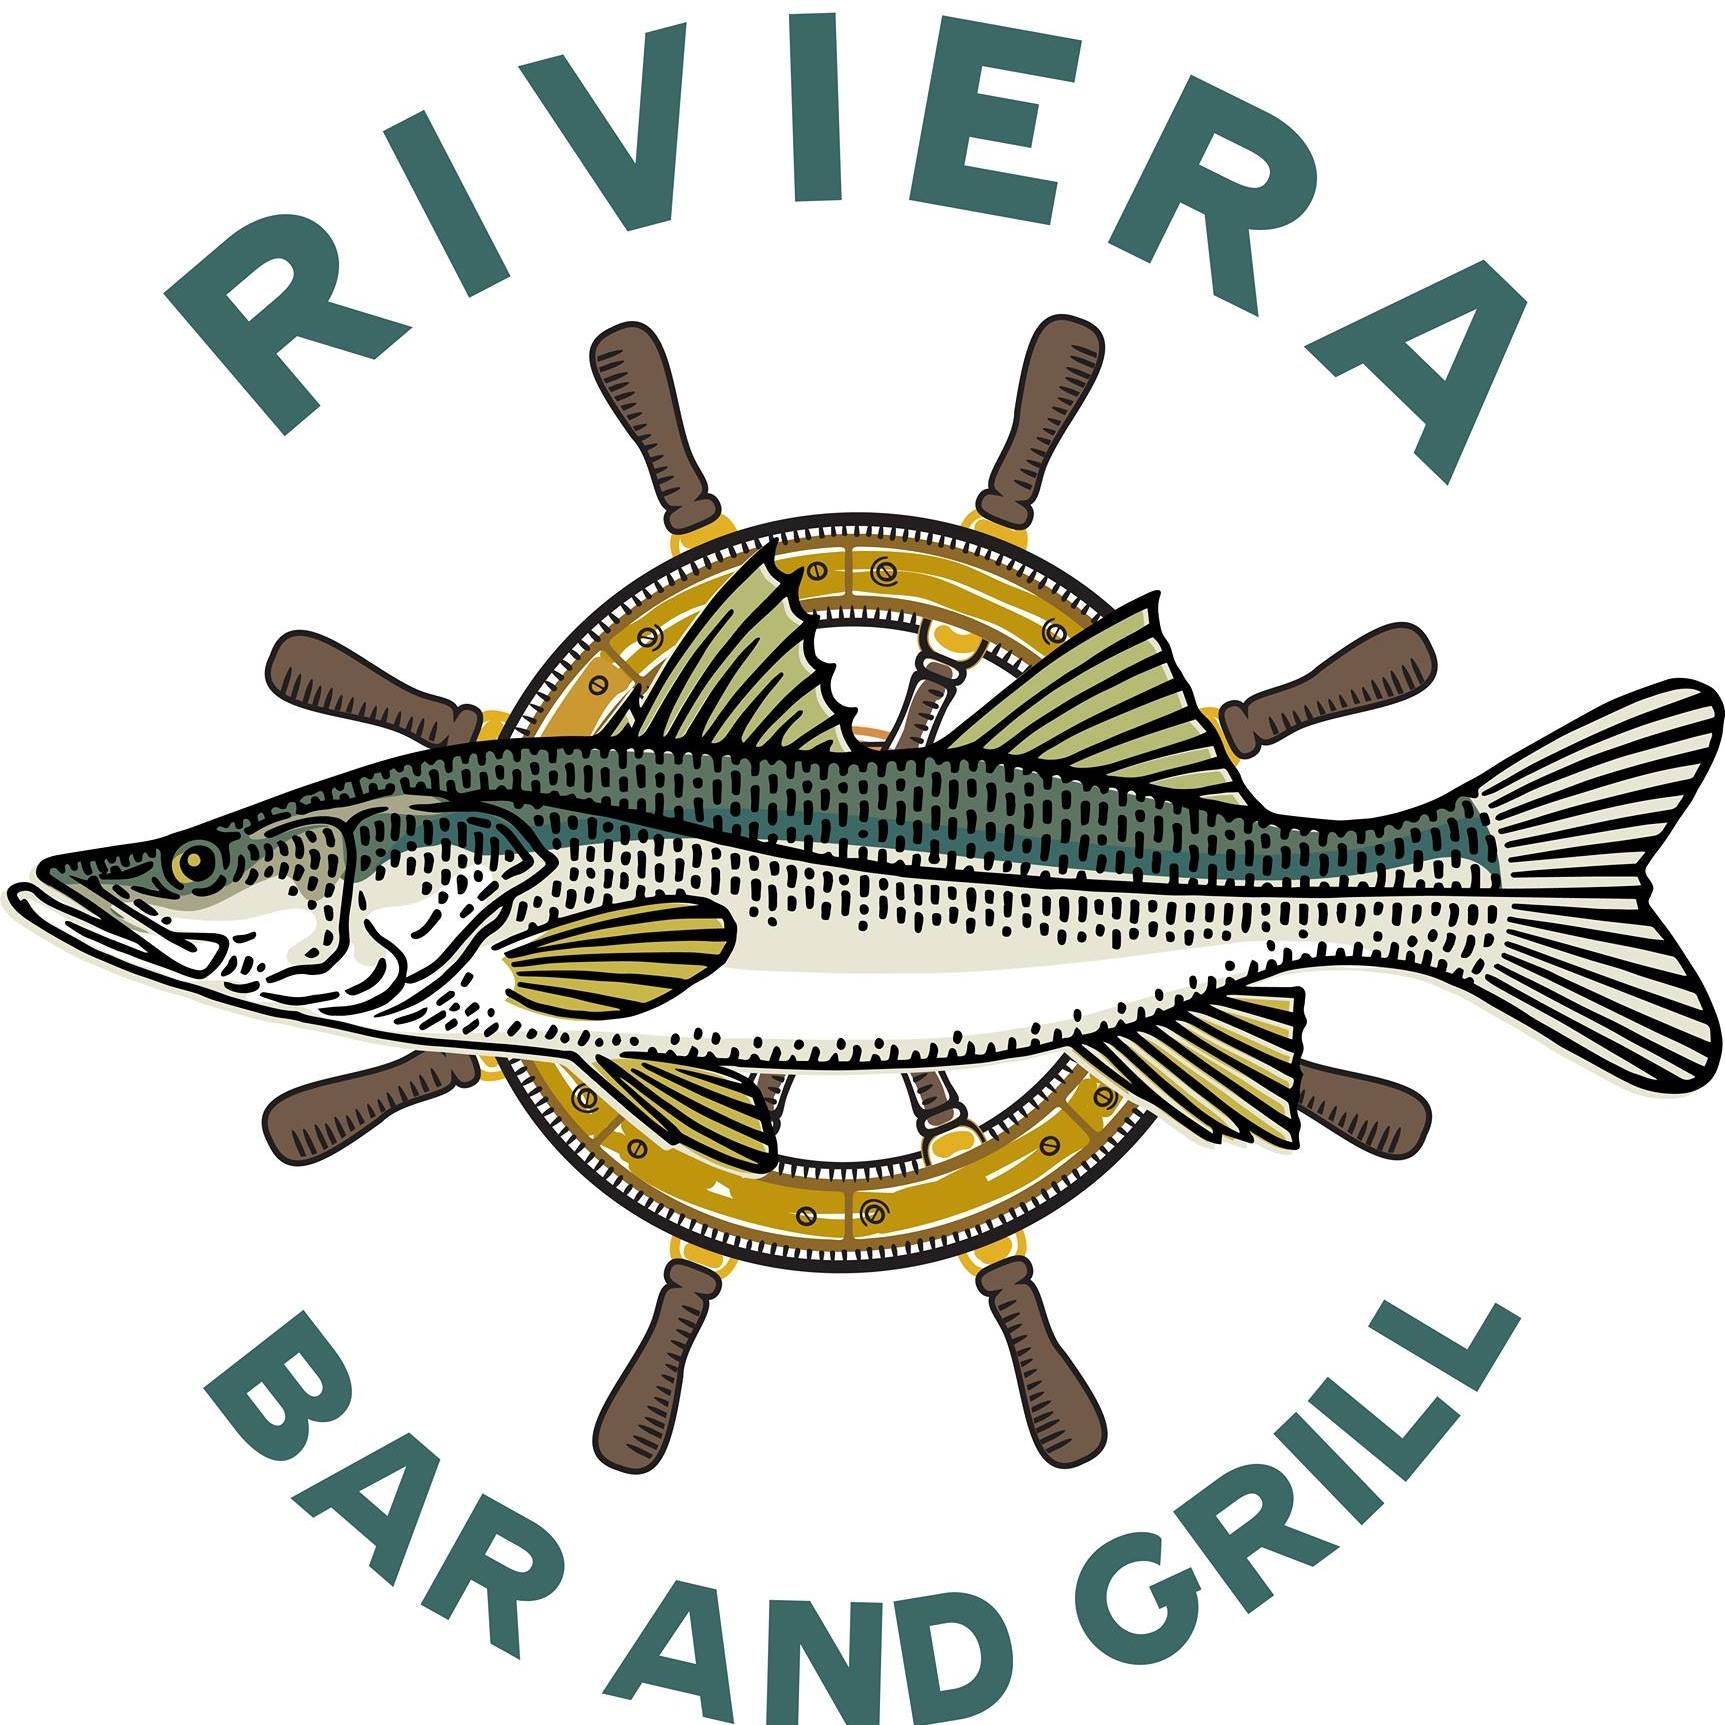 Lunch at Riviera Bar and Grill